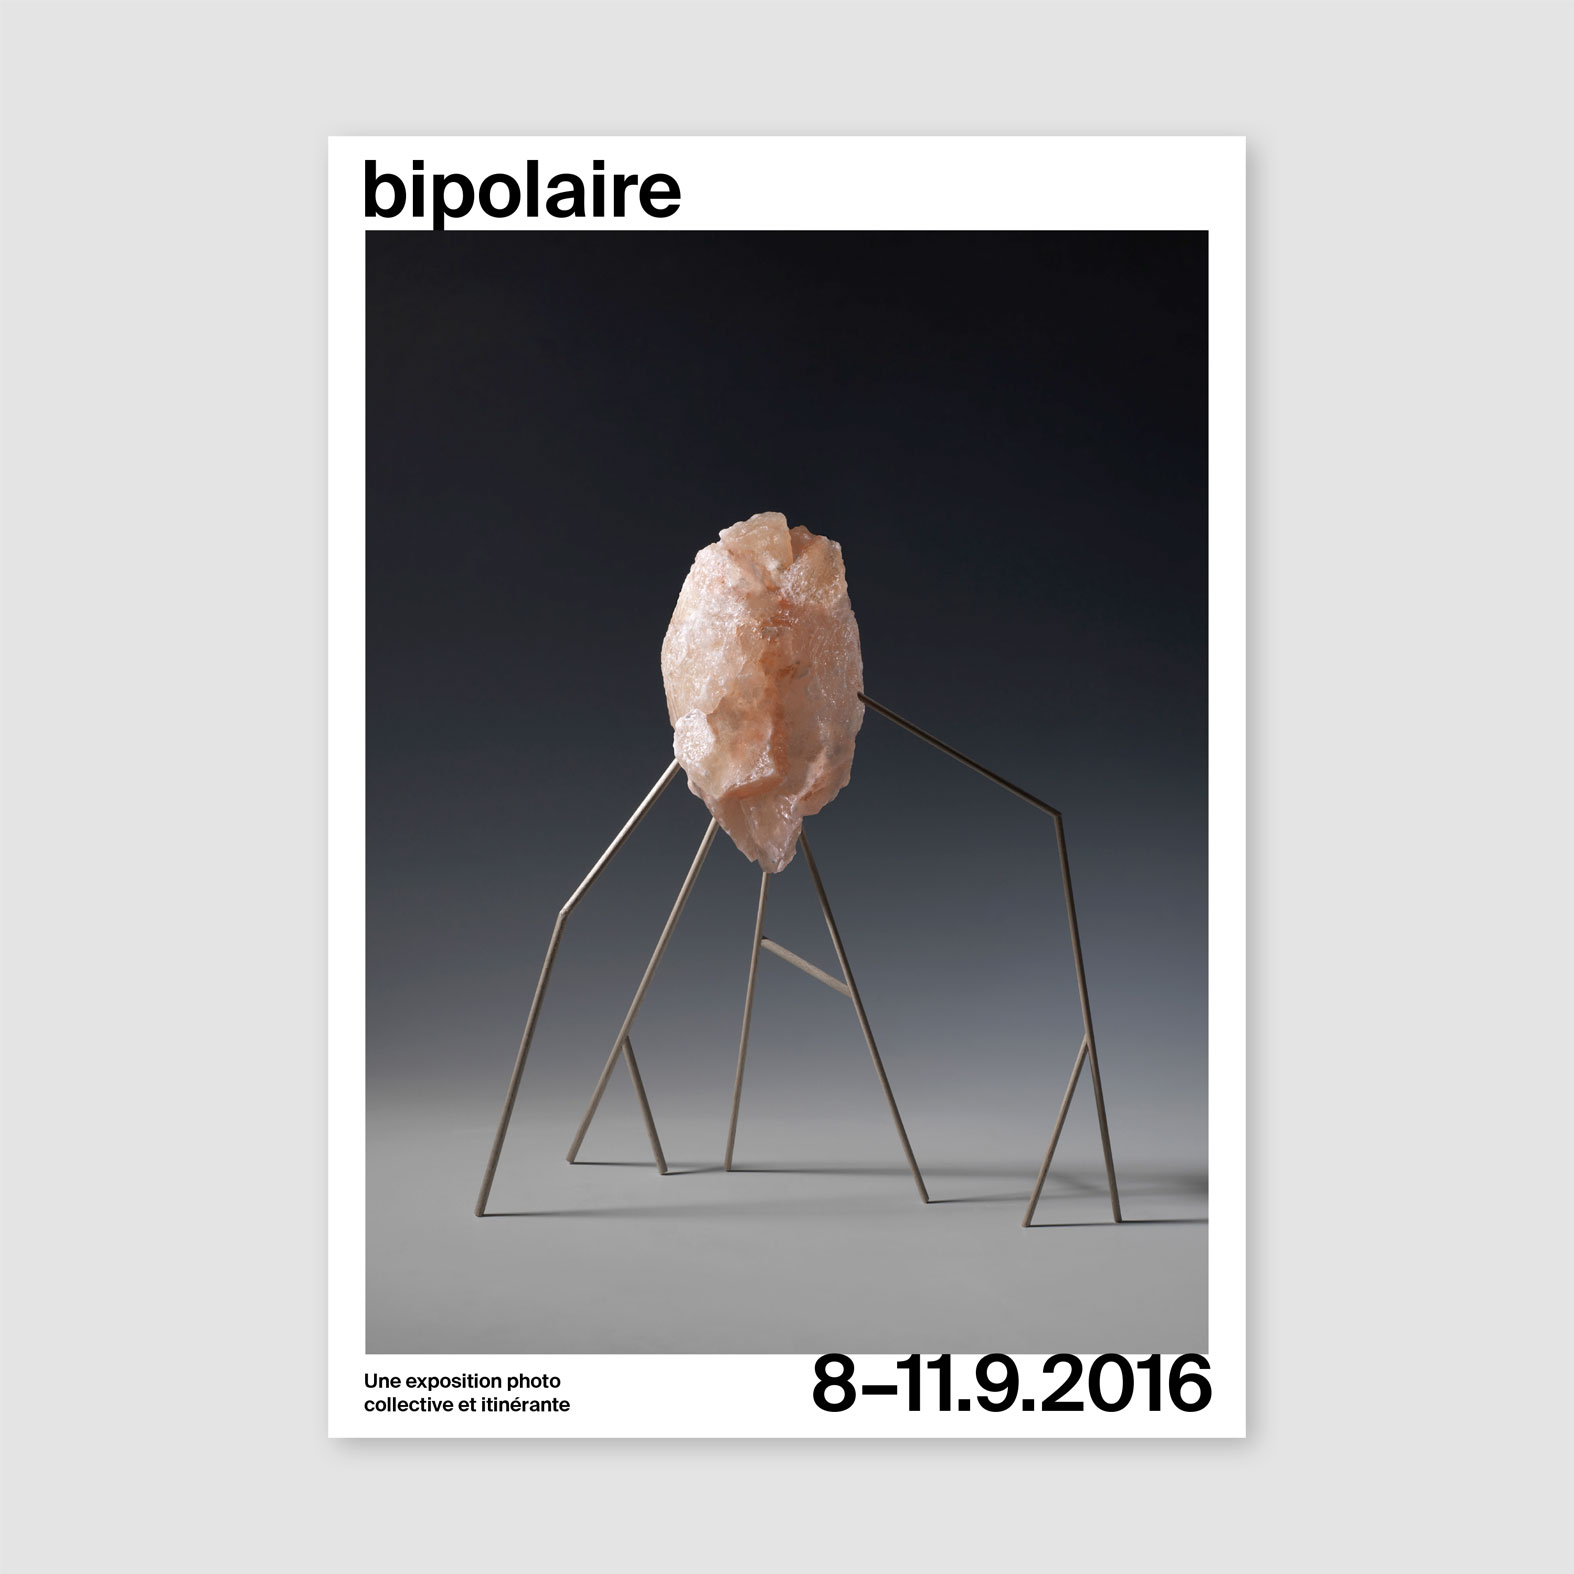 Bipolaire